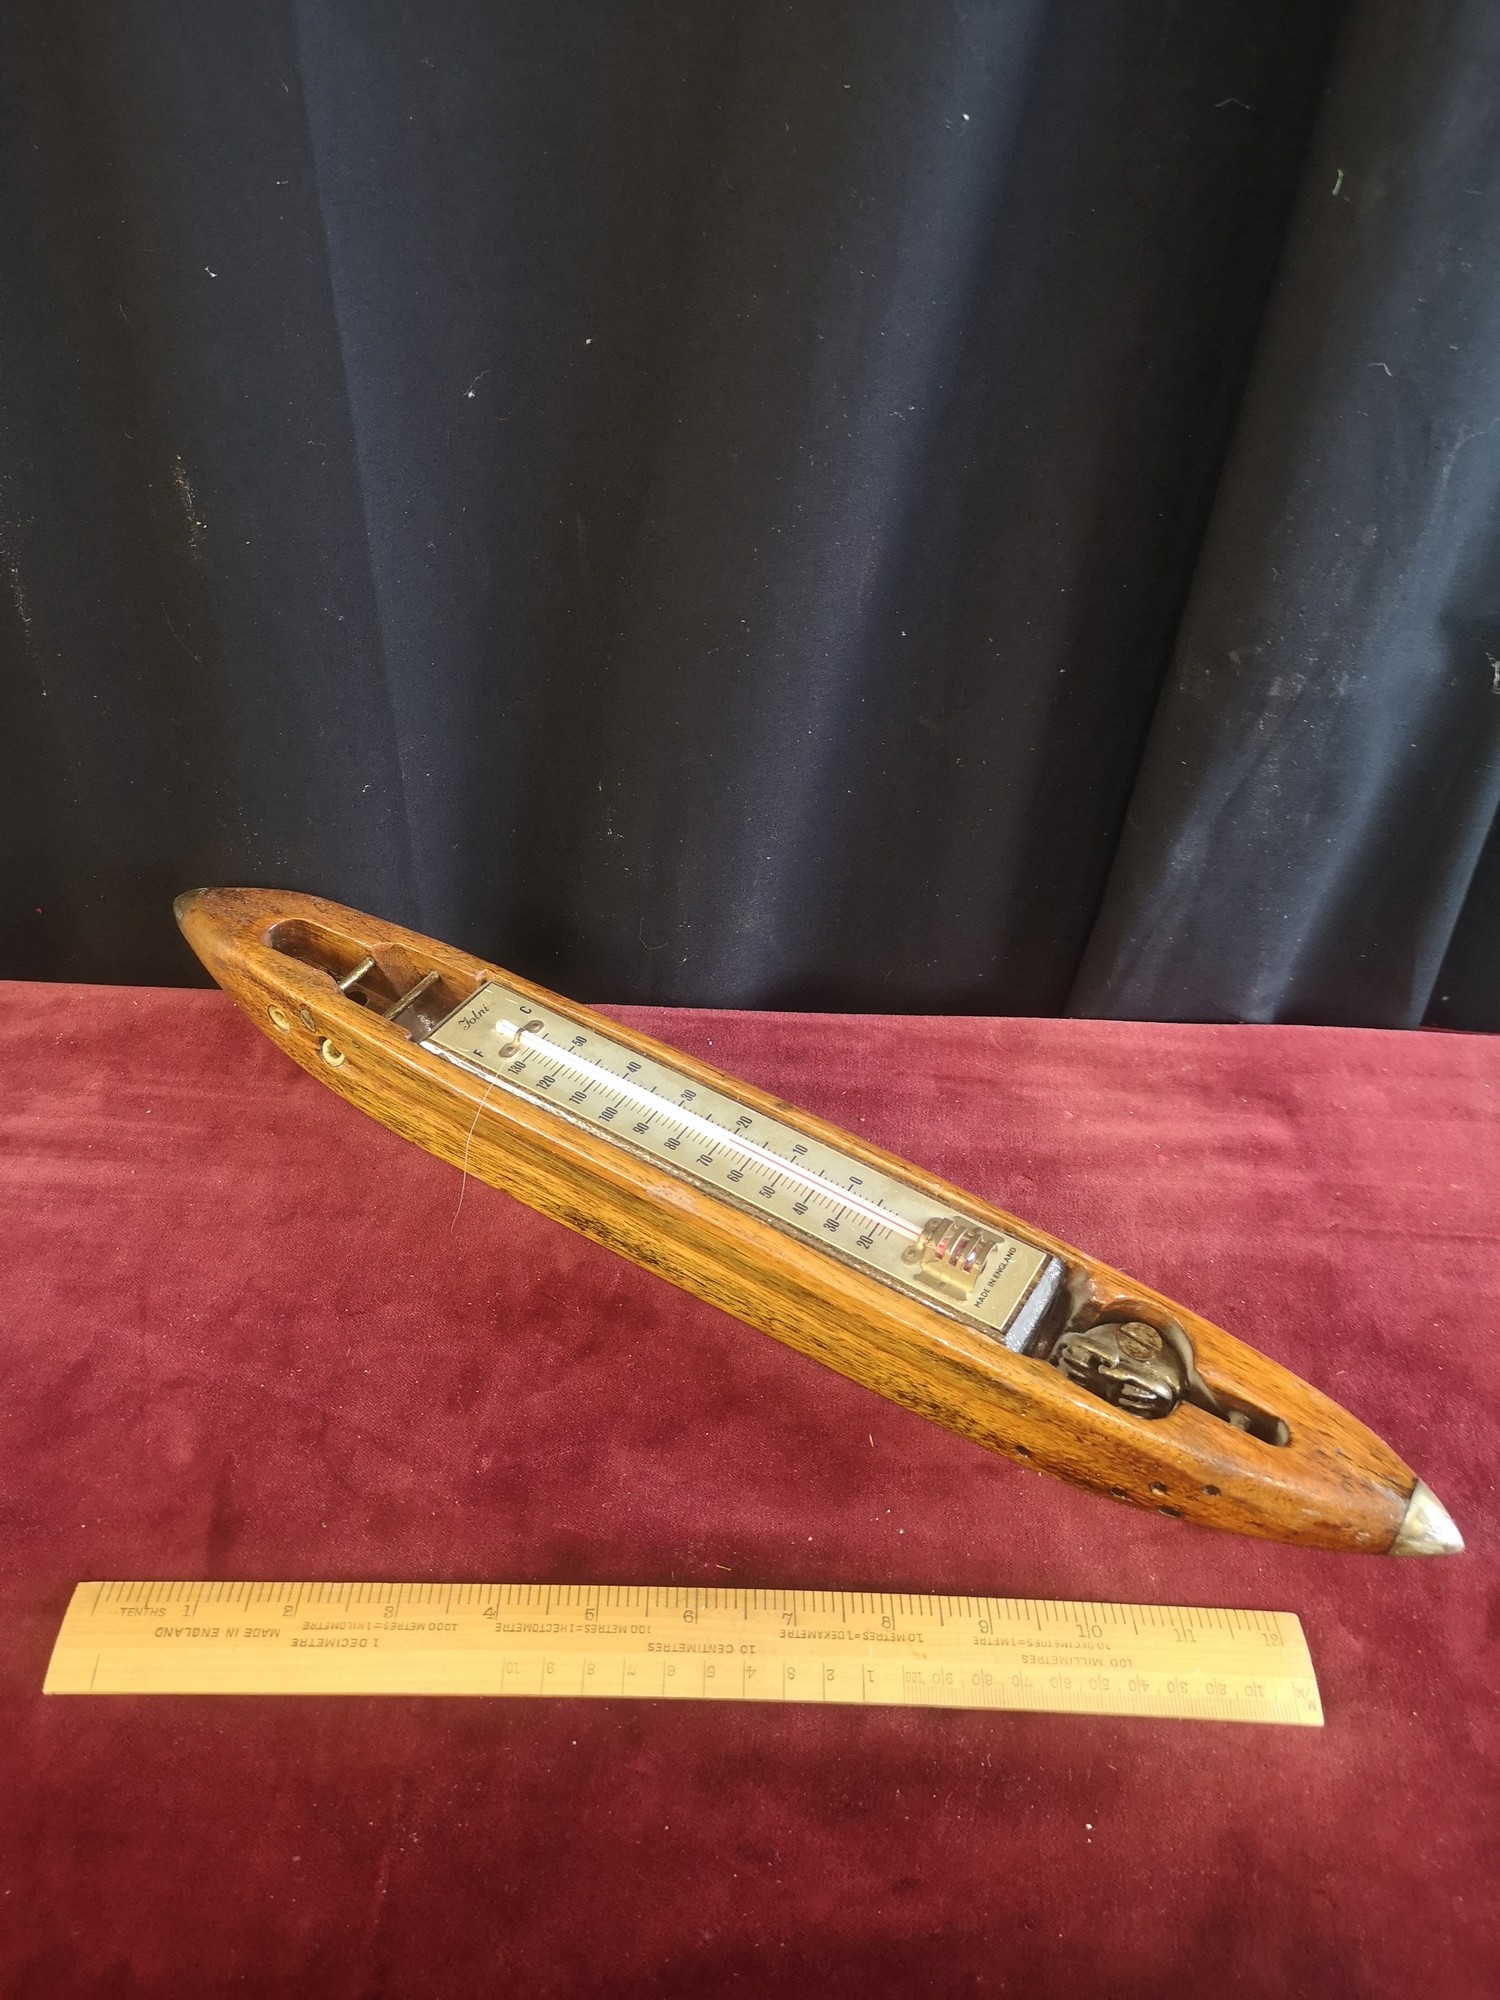 Arts and crafts thermometer made from light oak loom item.. 16 inches in length. End